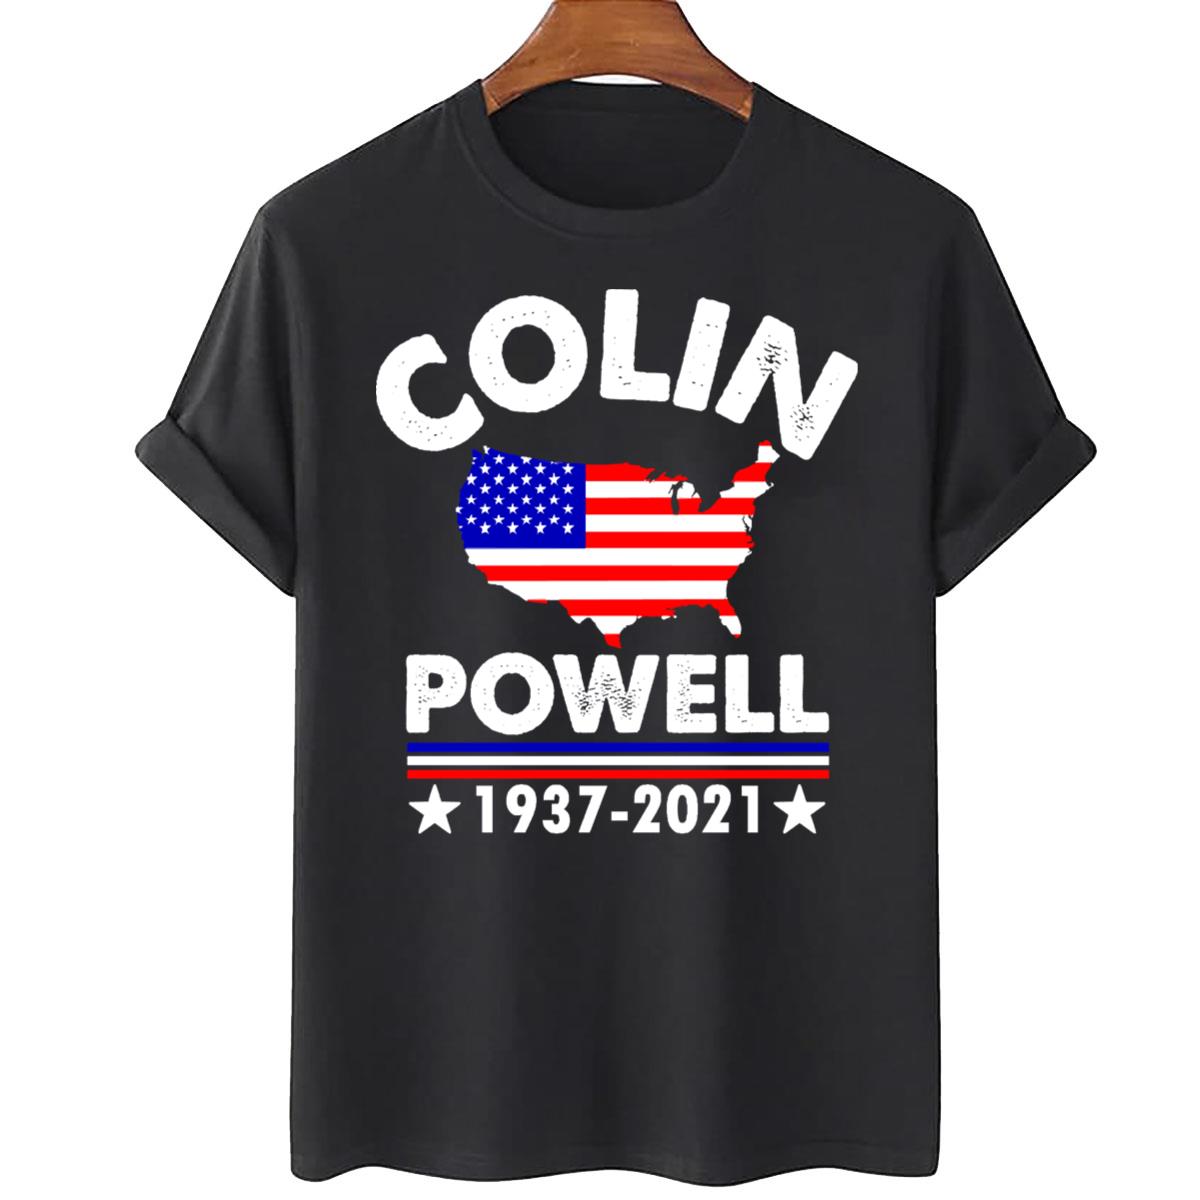 Colin Powell 1937-2021 T-Shirt The First Black Secretary Of State